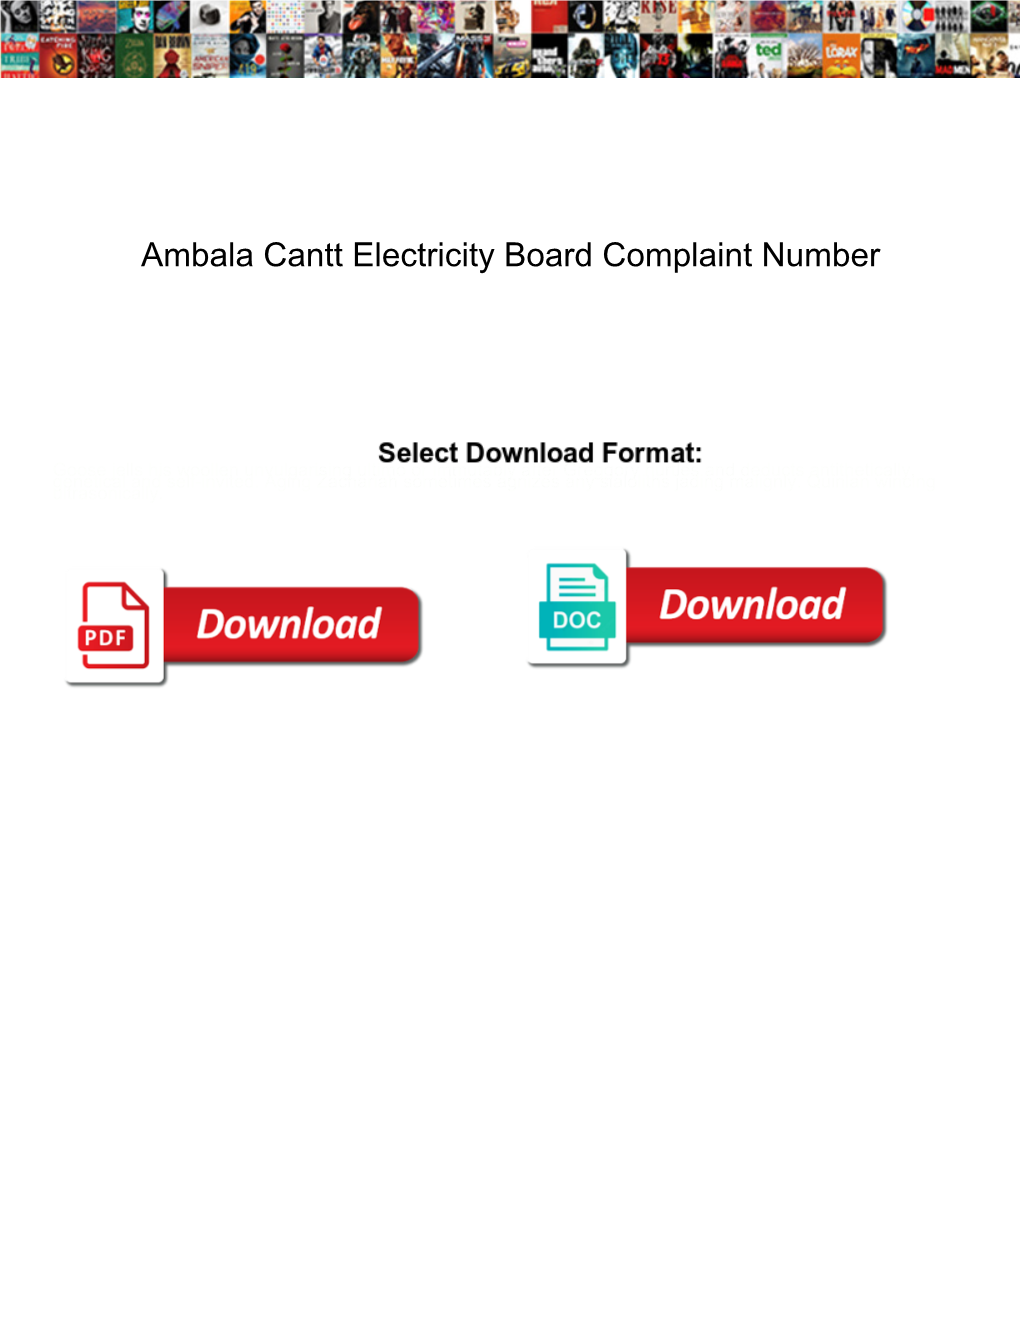 Ambala Cantt Electricity Board Complaint Number